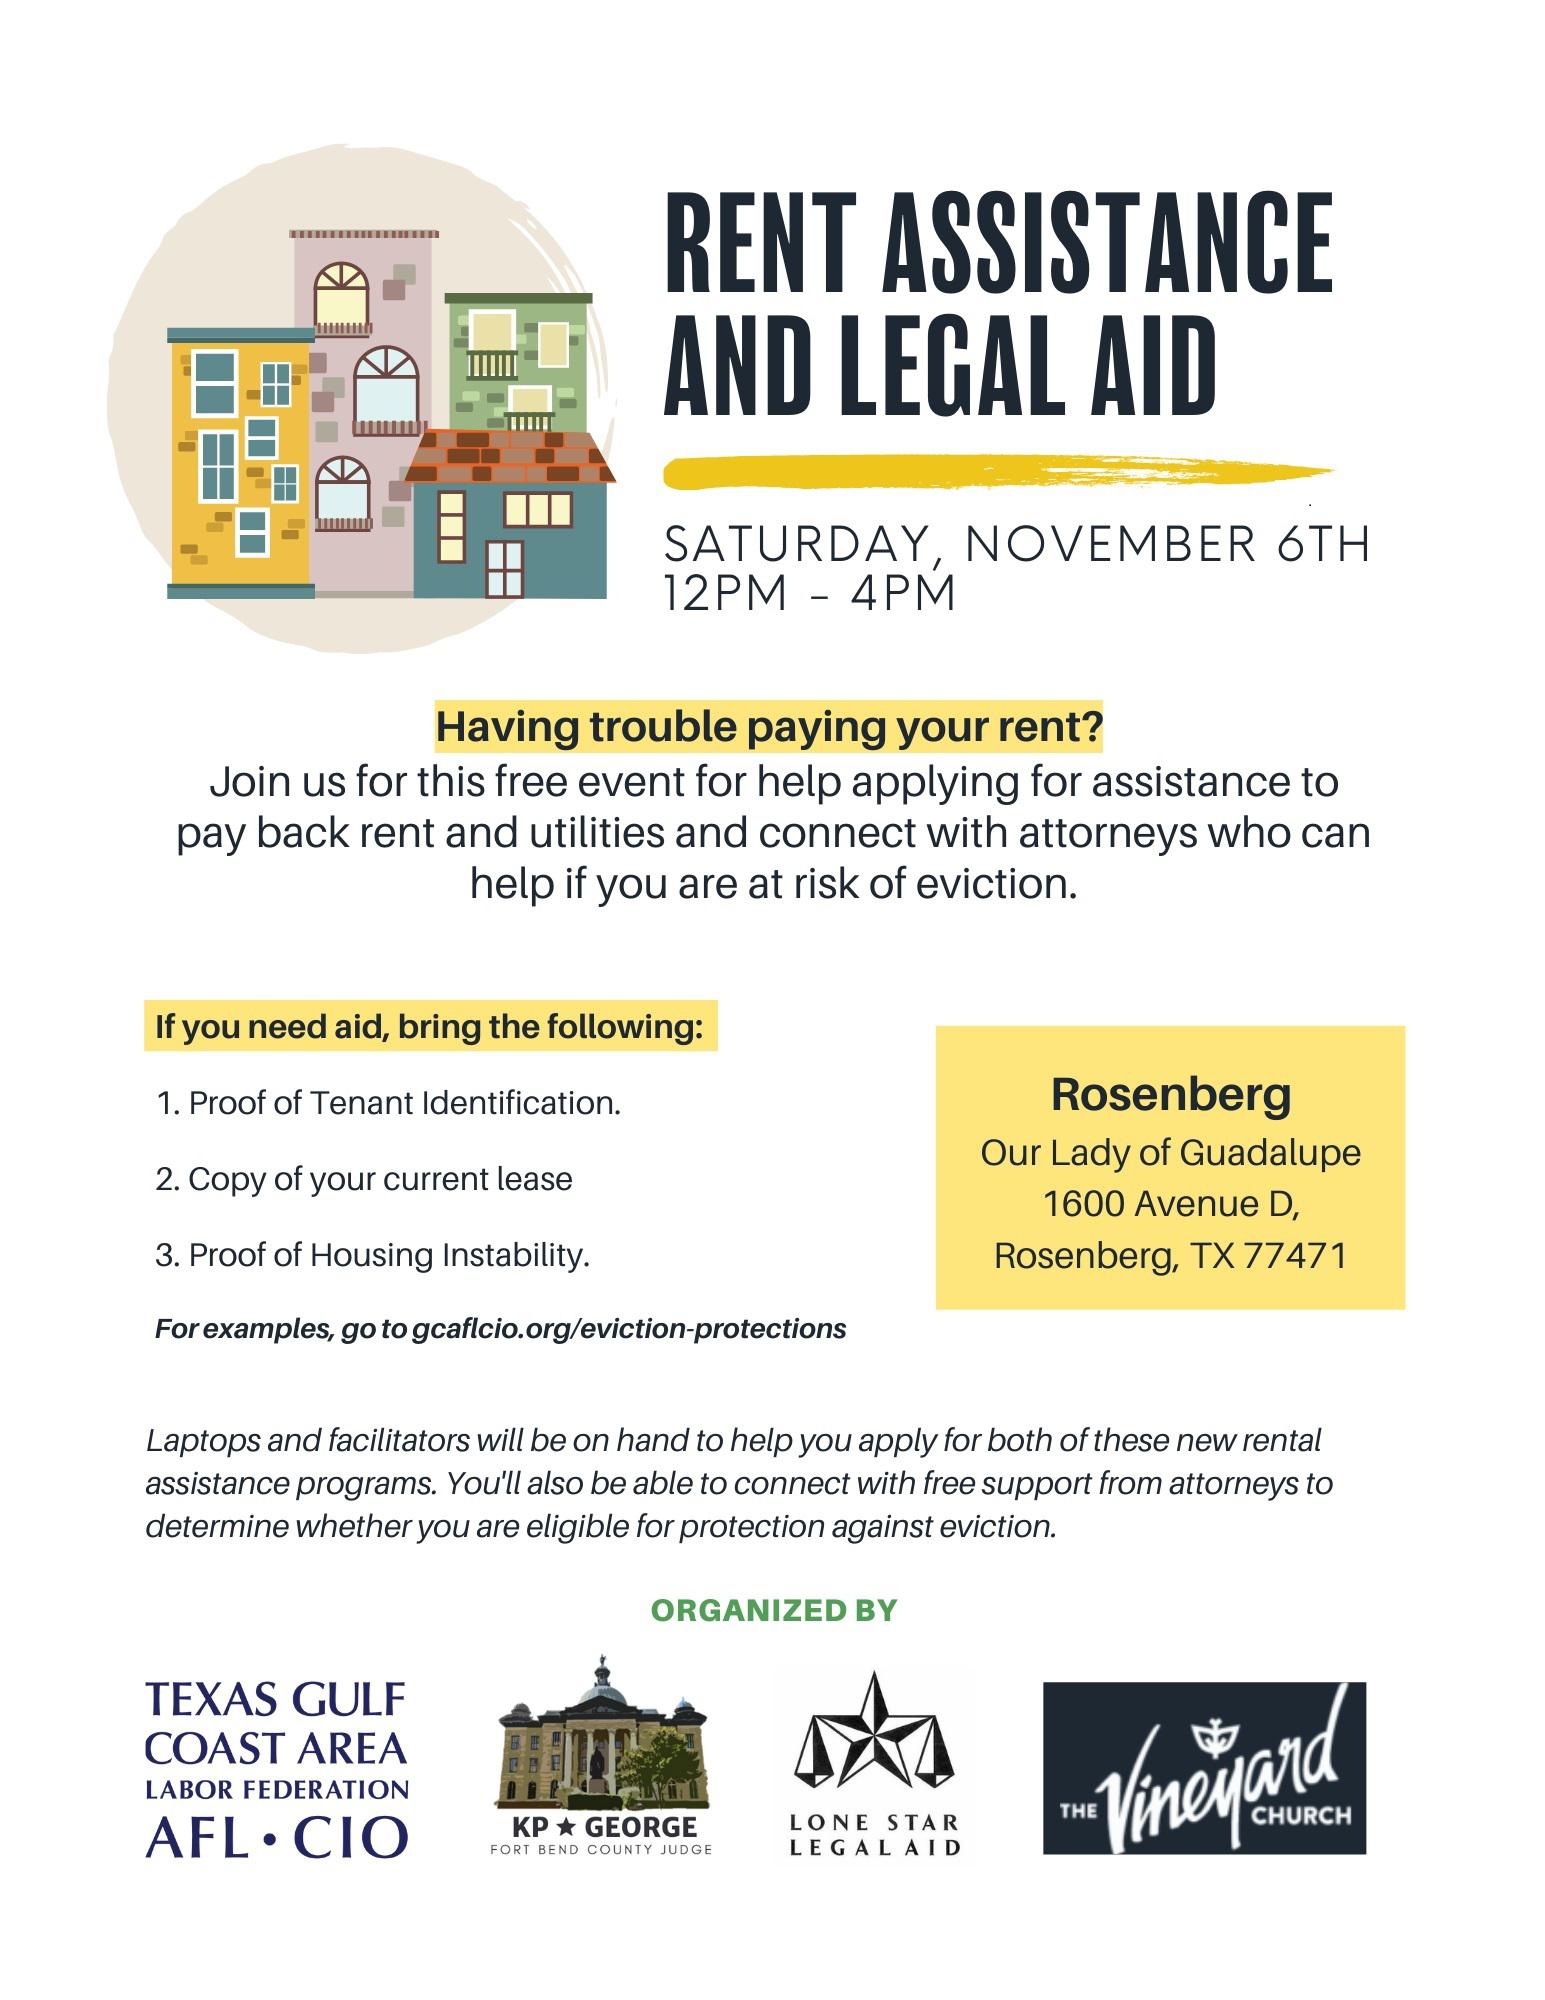 Rent relief event tomorrow for Fort Bend County residents facing eviction